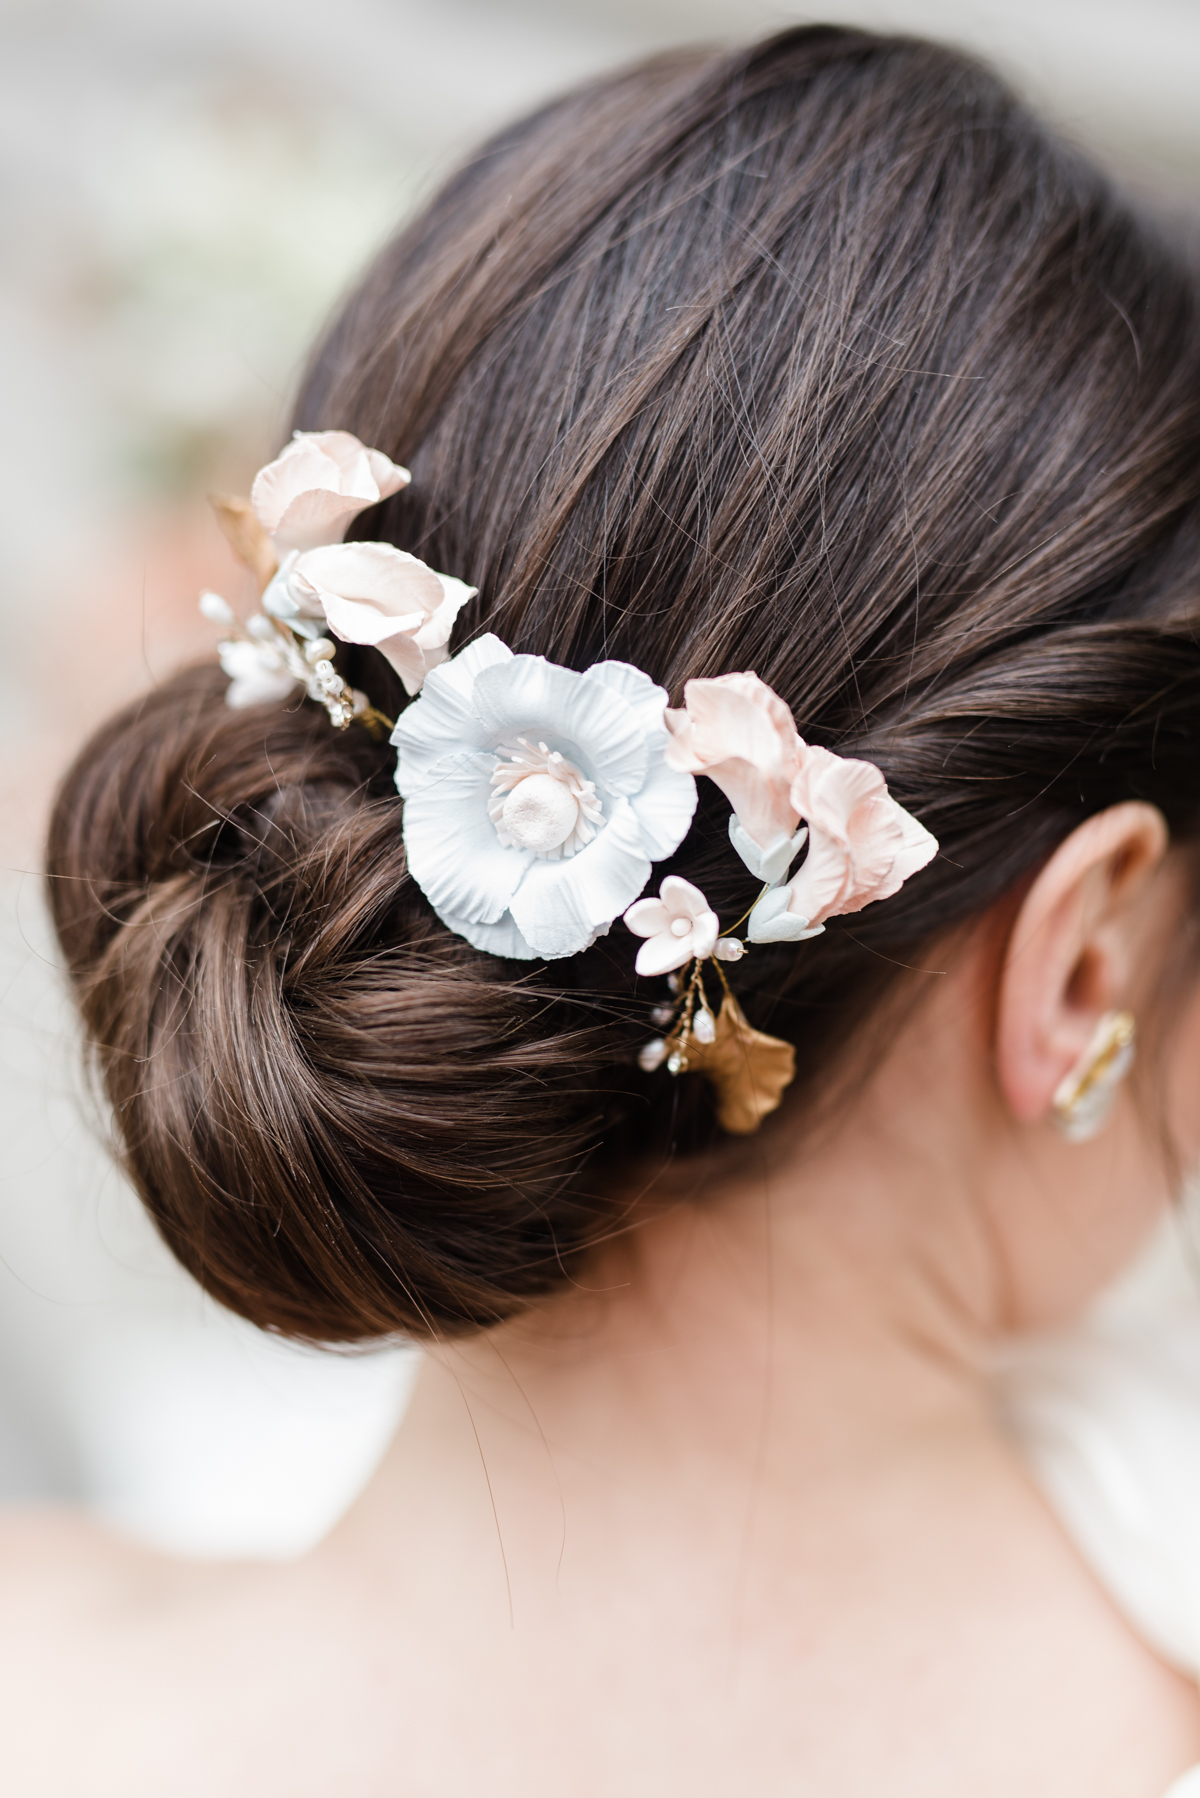 Classic Bridal Up-Do with Hair Accessories | Simply Charming Socials | Atlanta Wedding Planner